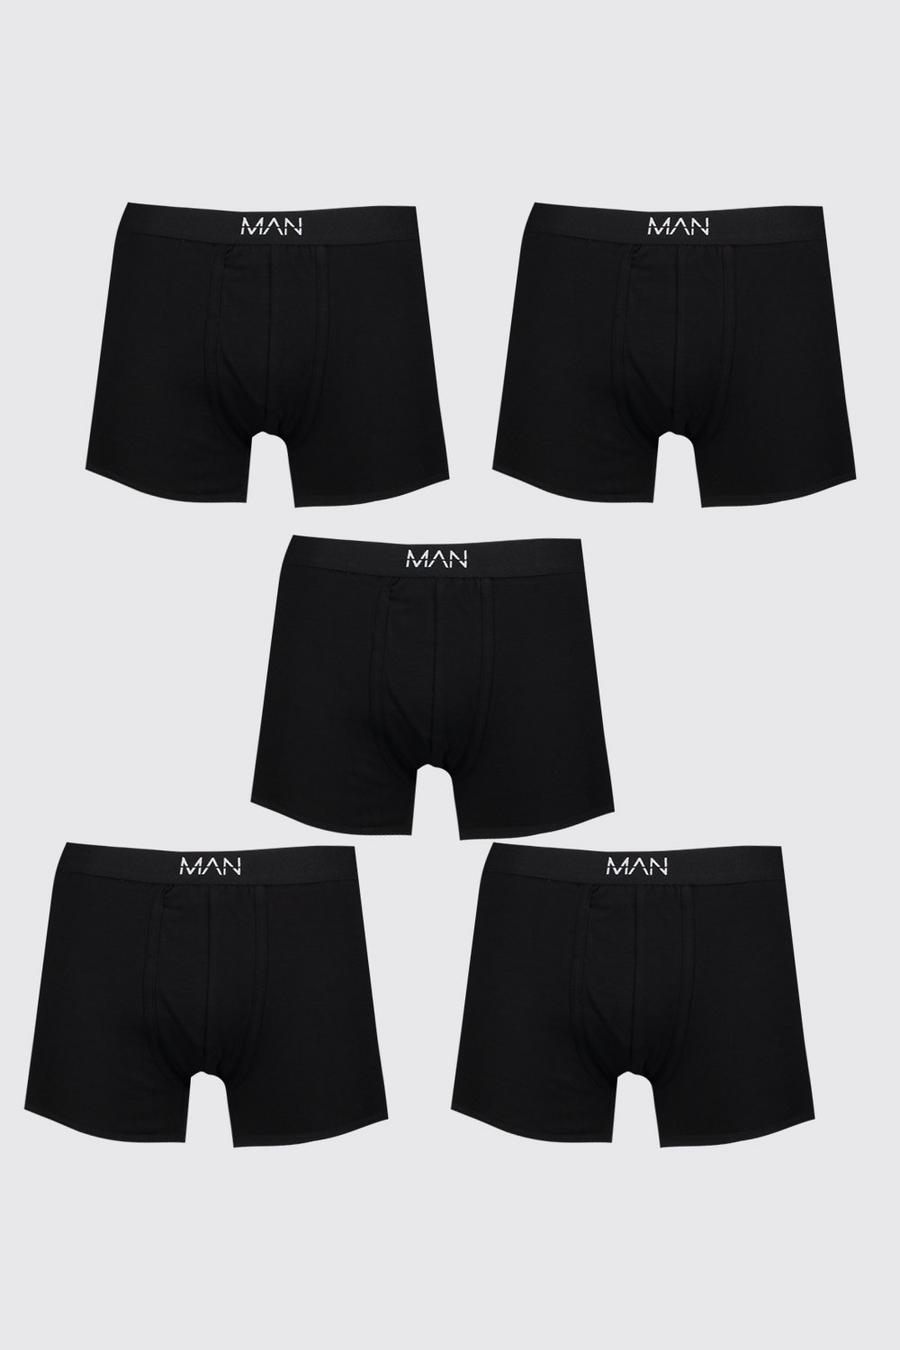 Plus Size 5 Pack MAN Boxers | boohoo